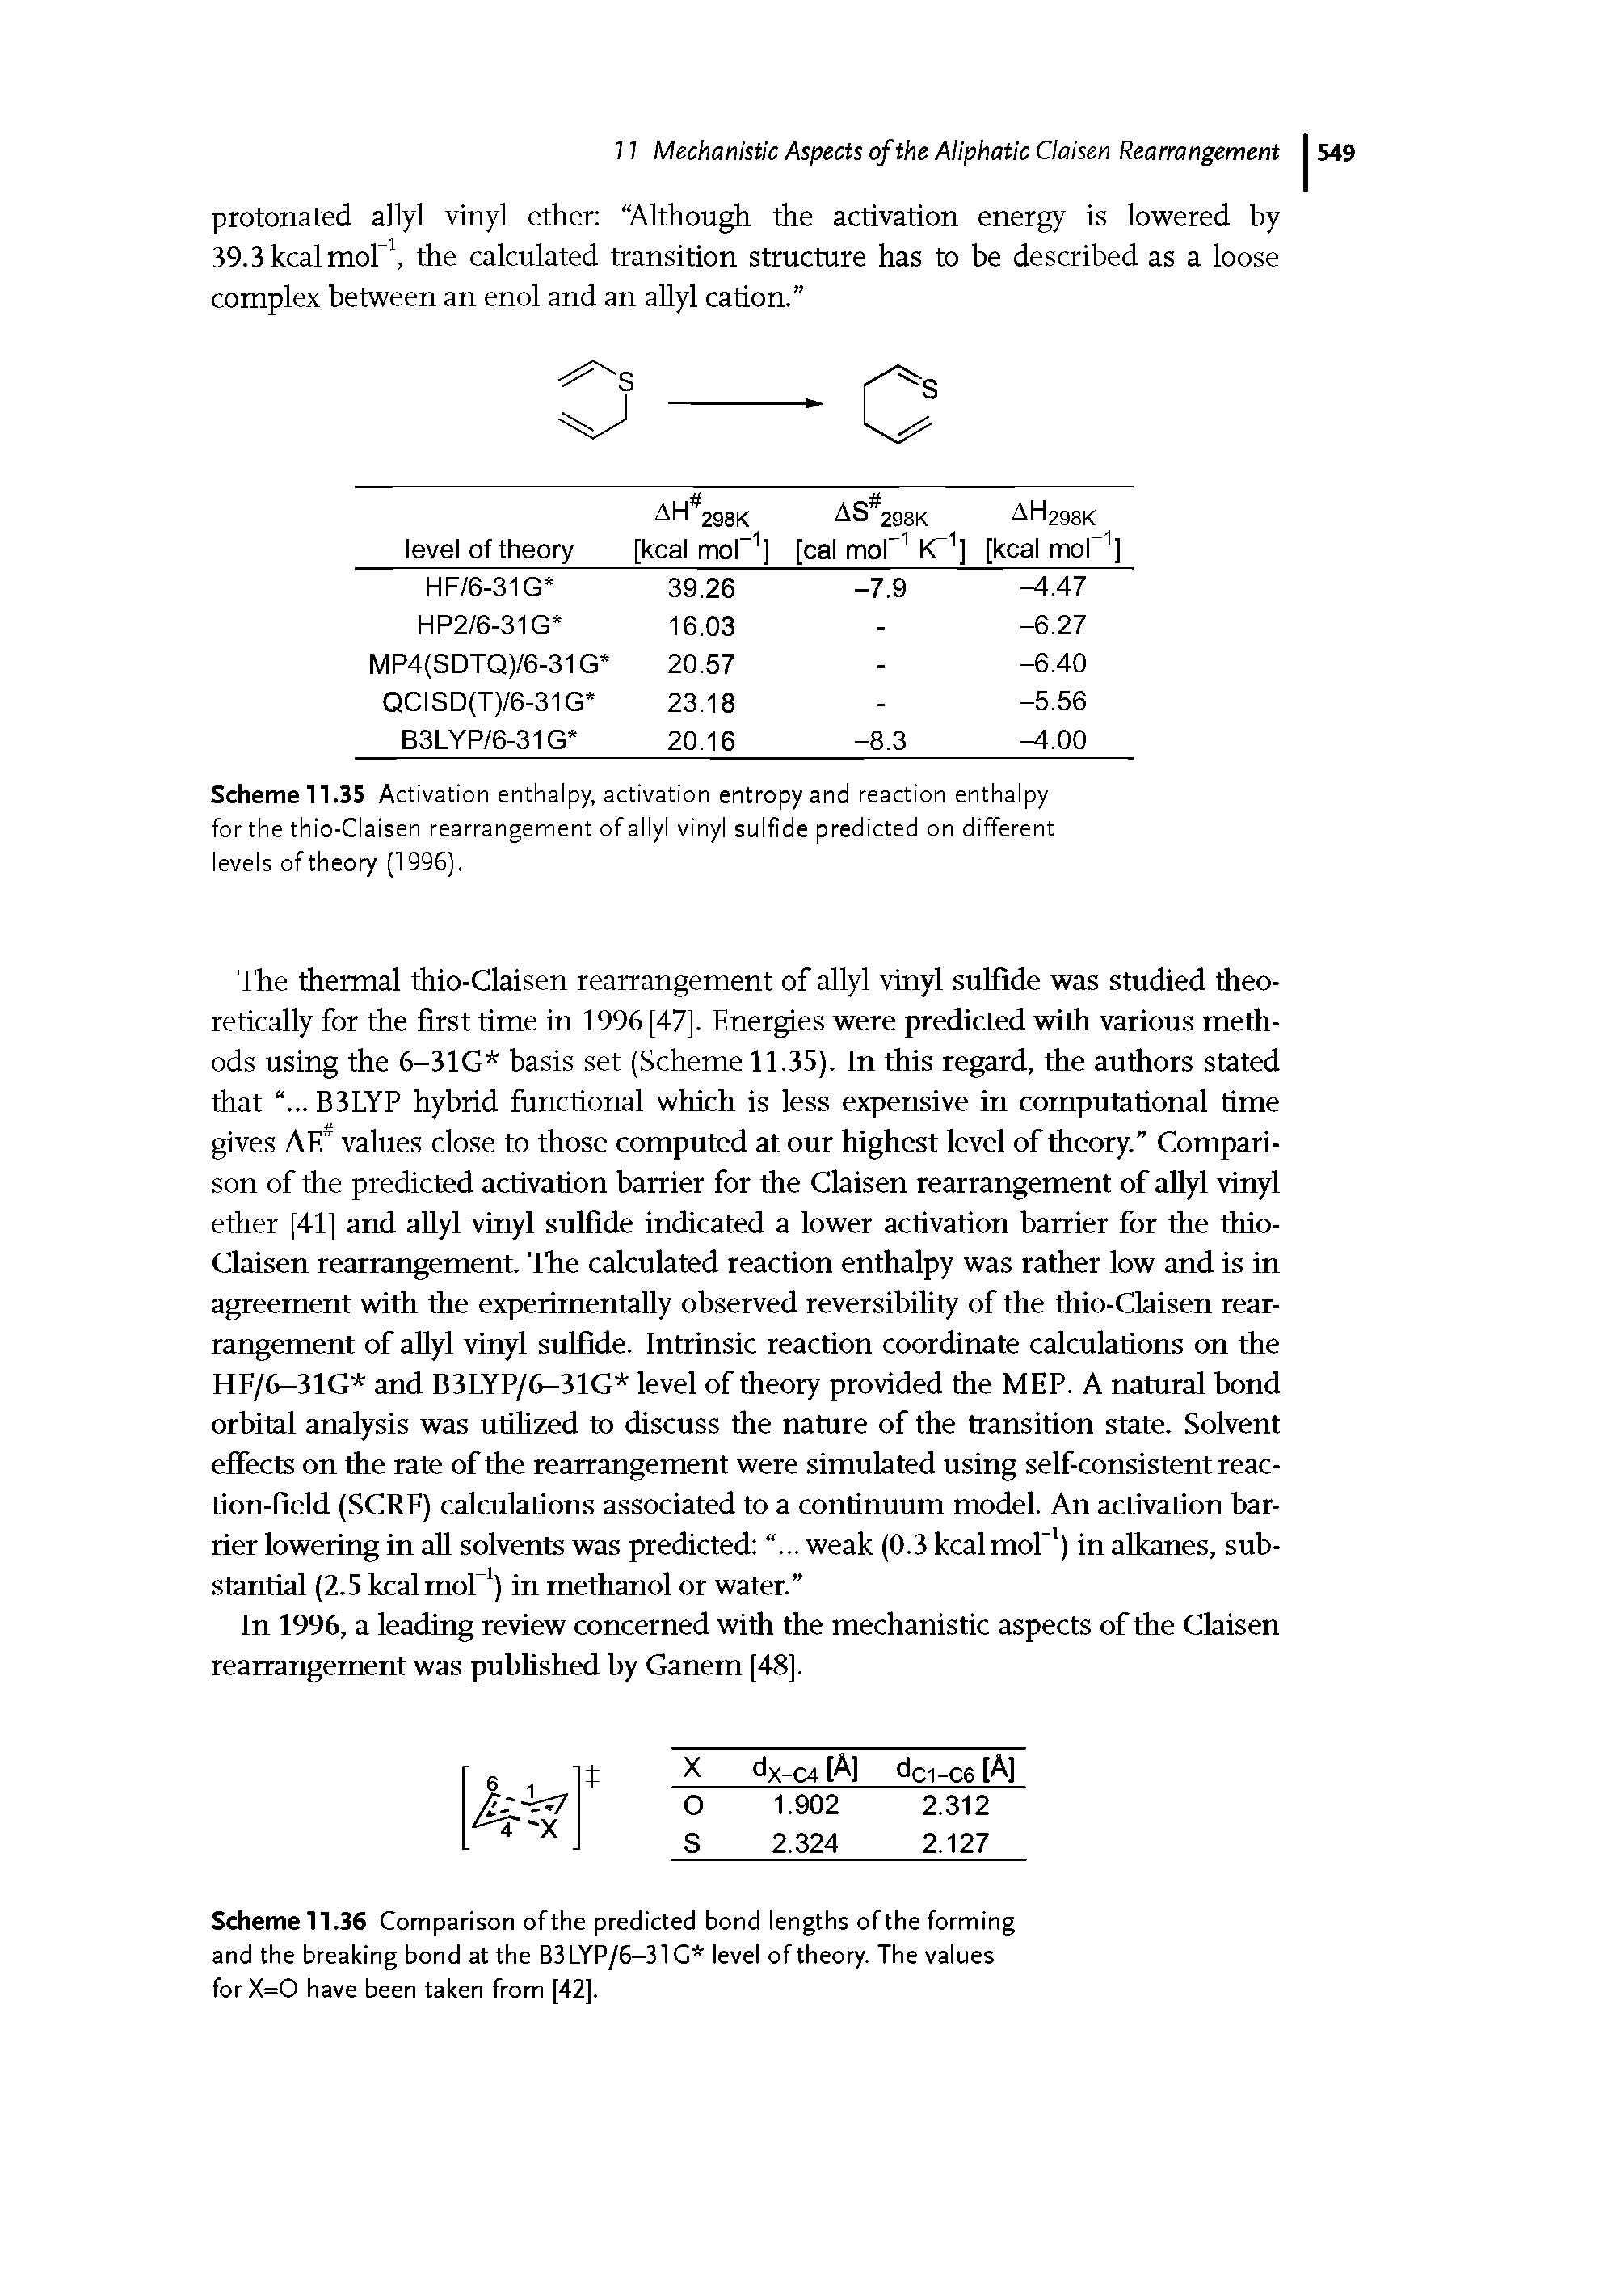 Scheme 11.35 Activation enthalpy, activation entropy and reaction enthalpy for the thio-Claisen rearrangement of allyl vinyl sulfide predicted on different levels oftheo7 (1996).